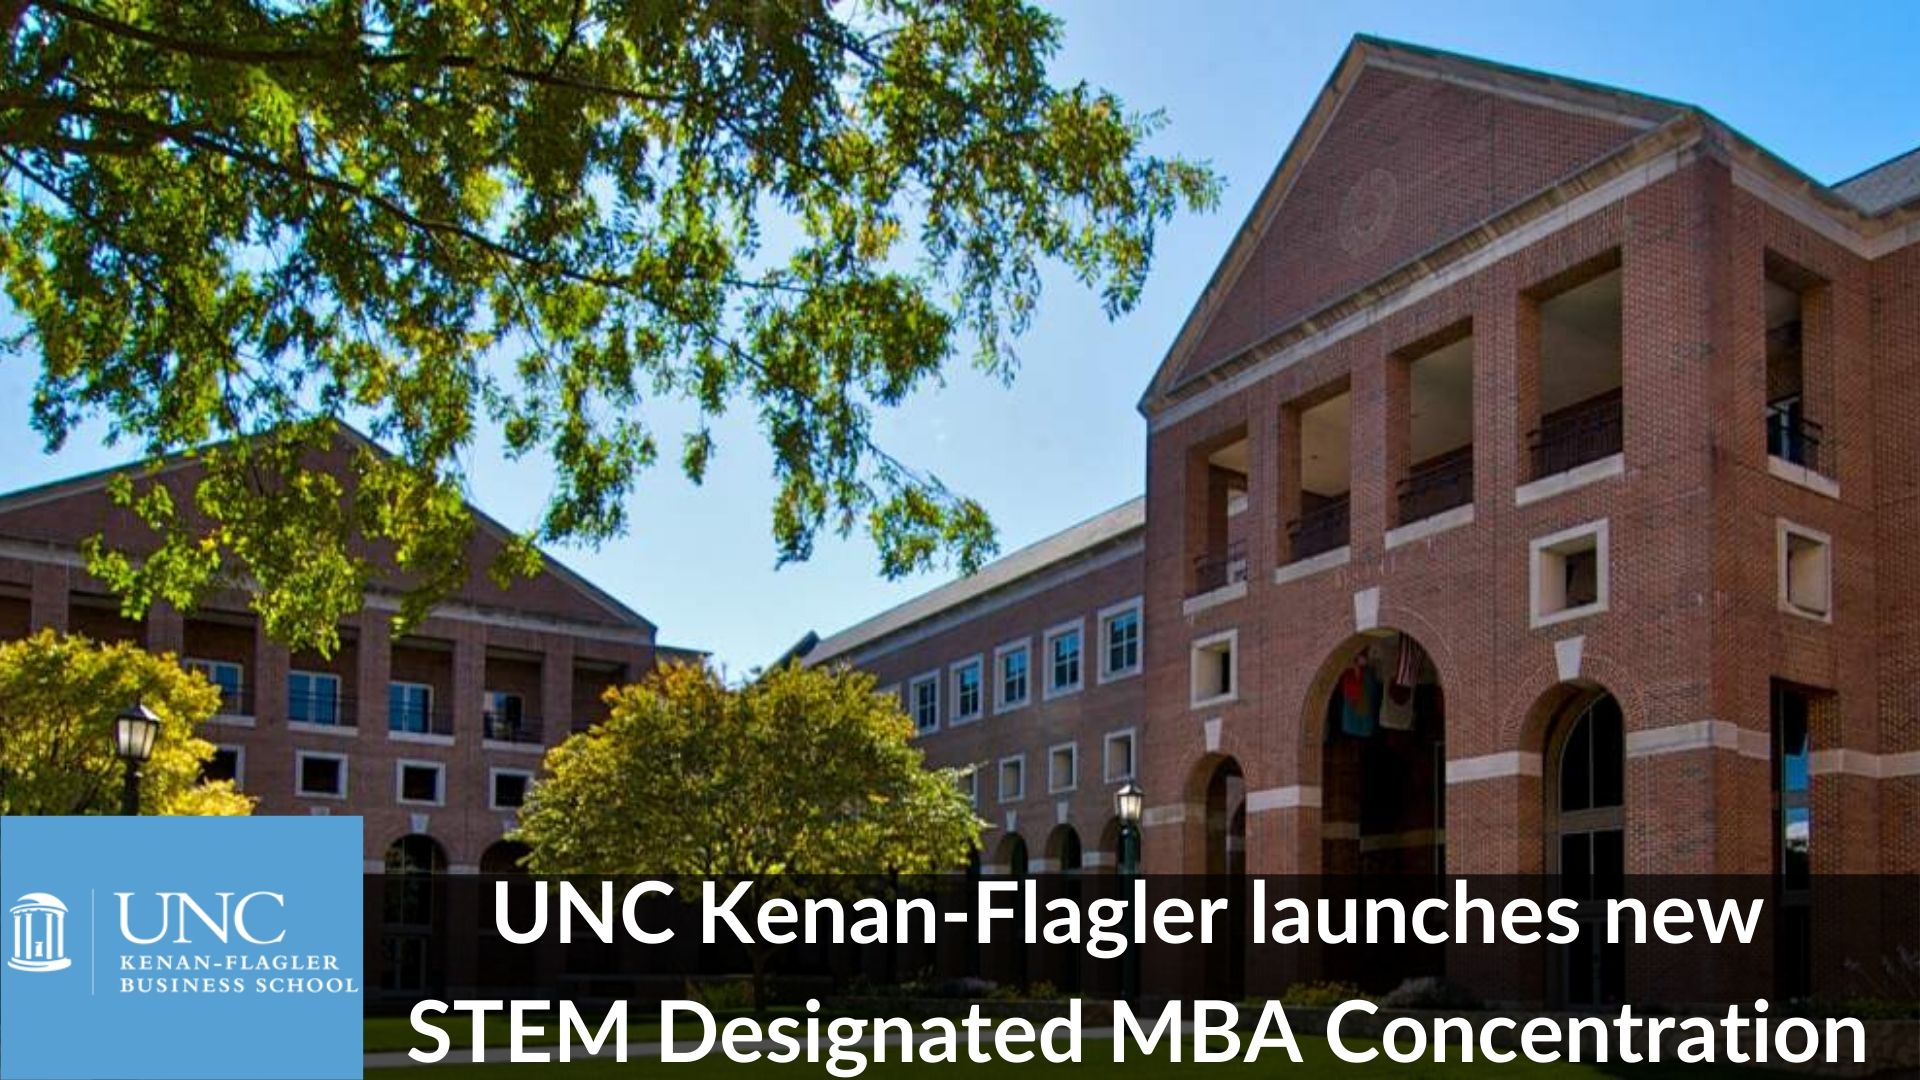 UNC Kenan-Flagler launches new STEM MBA concentration